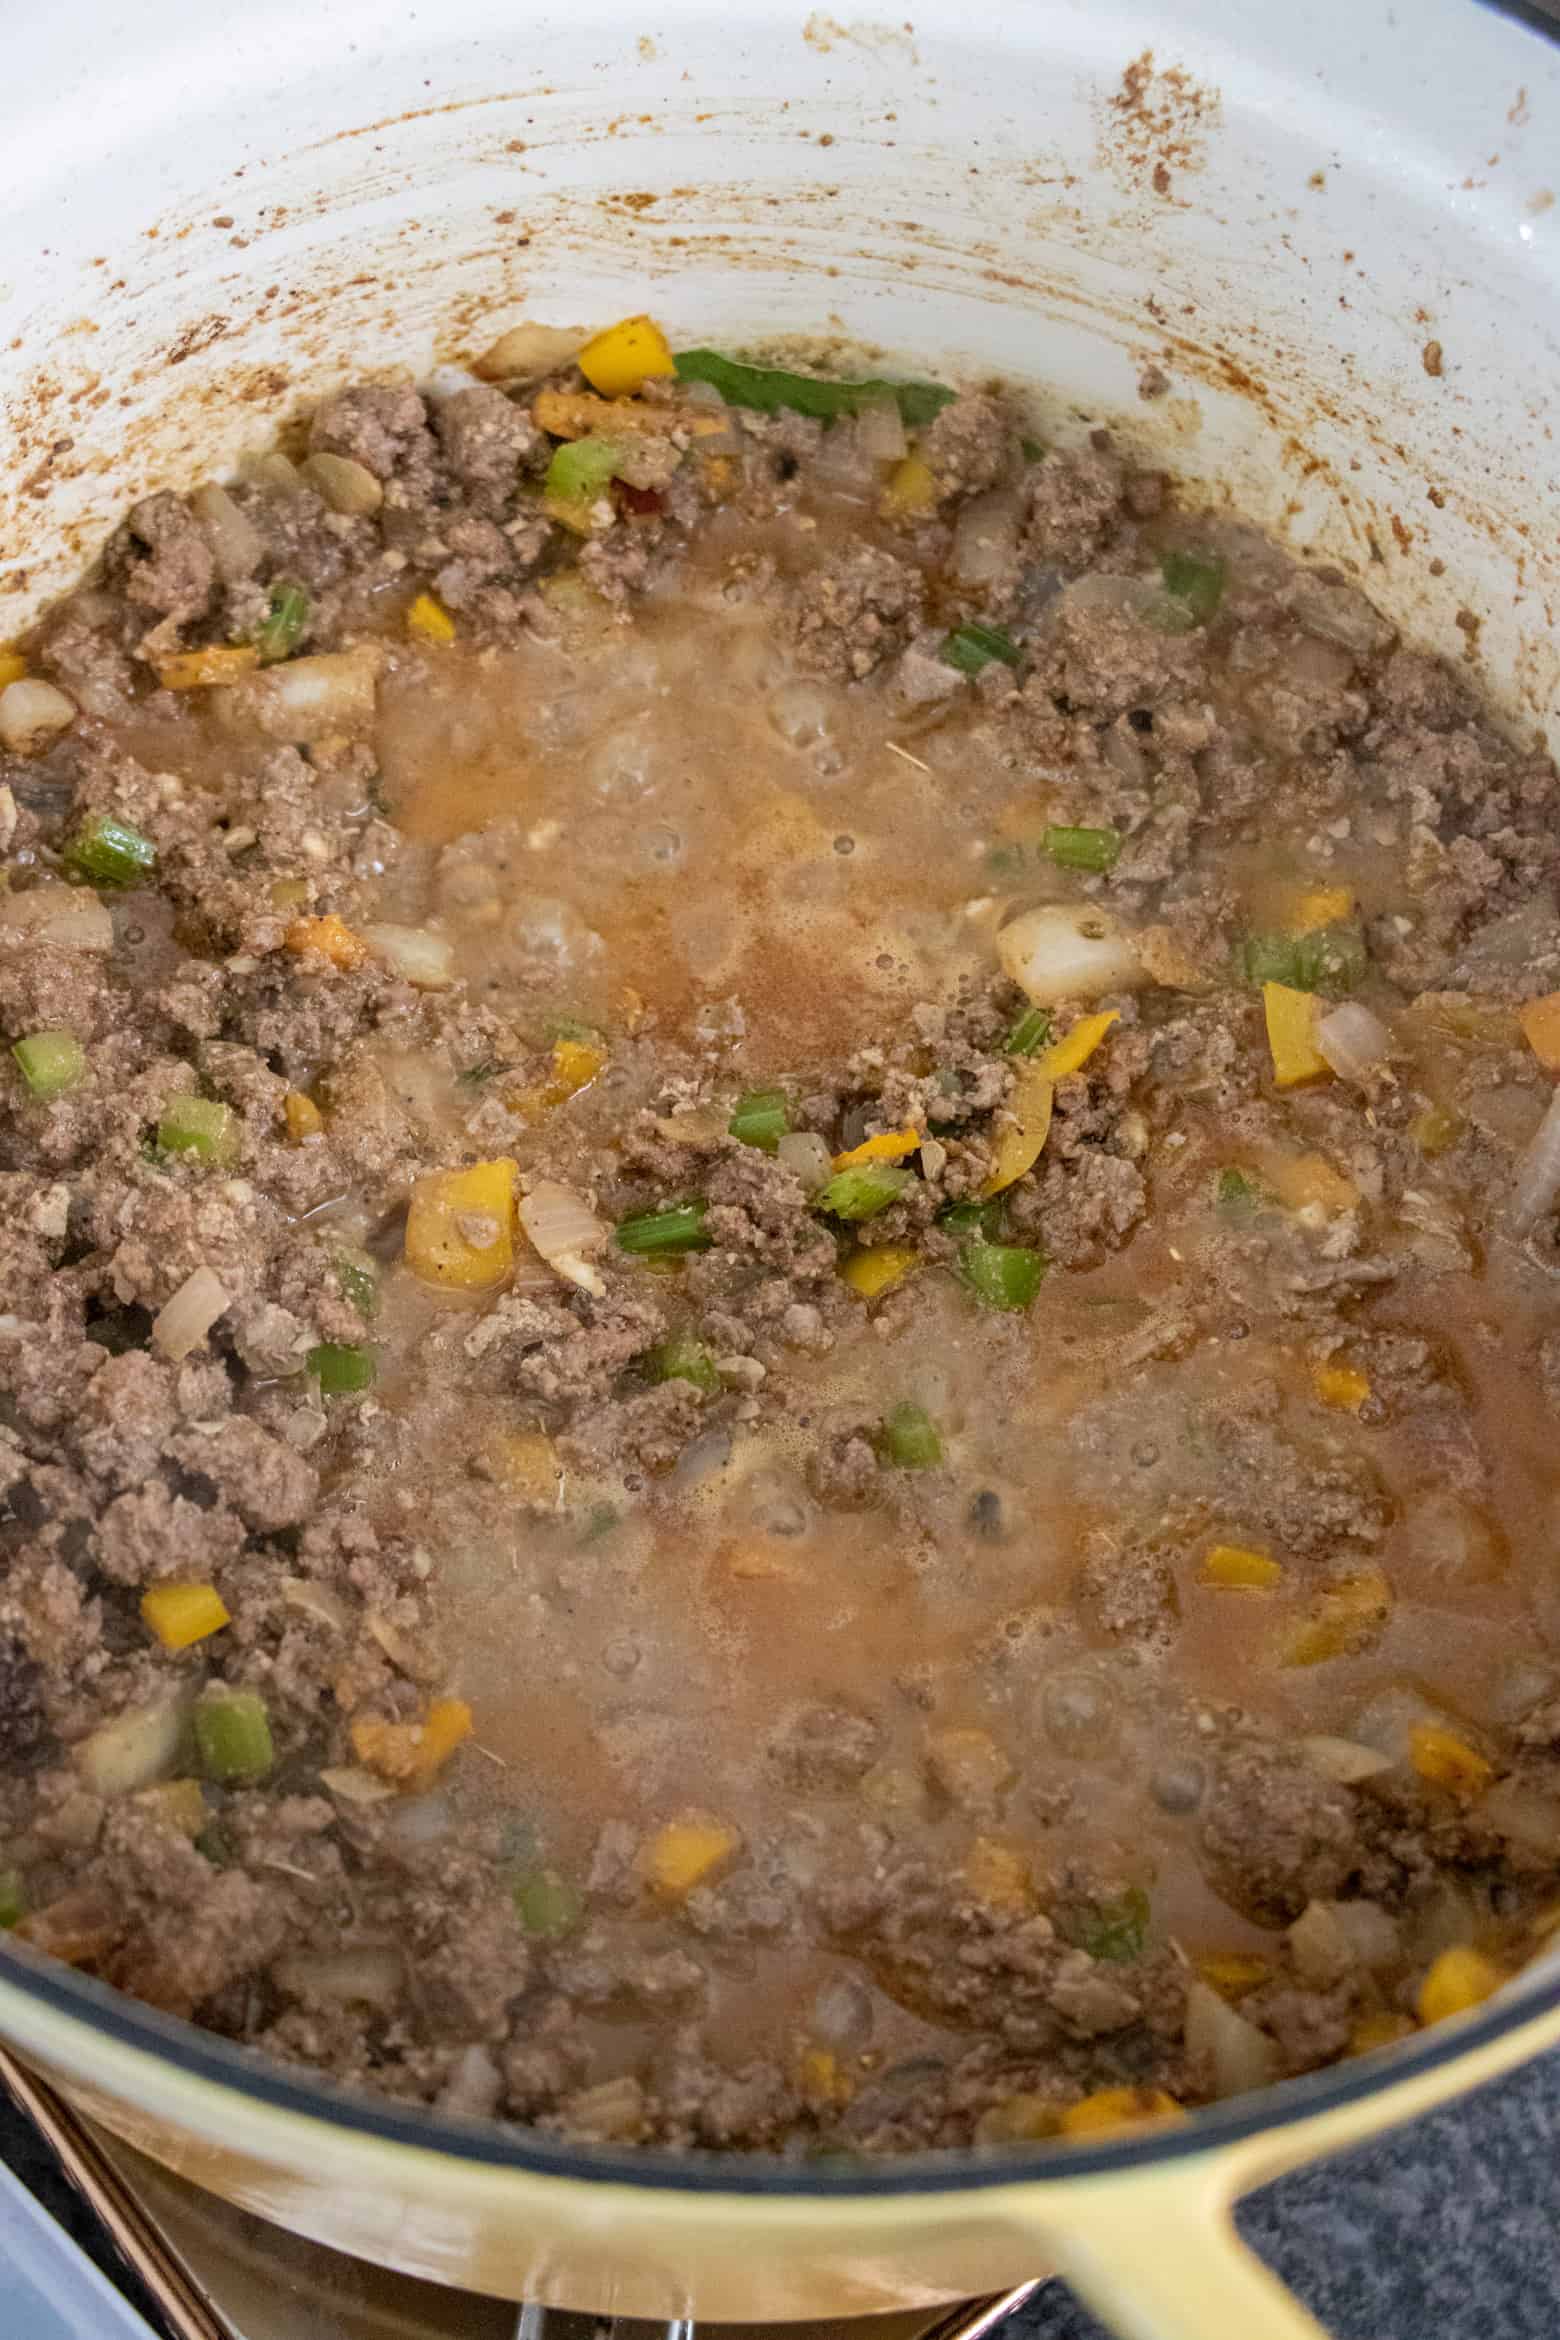 Dirty rice mixture of vegetables, ground beef, and stock cooking in a pot.